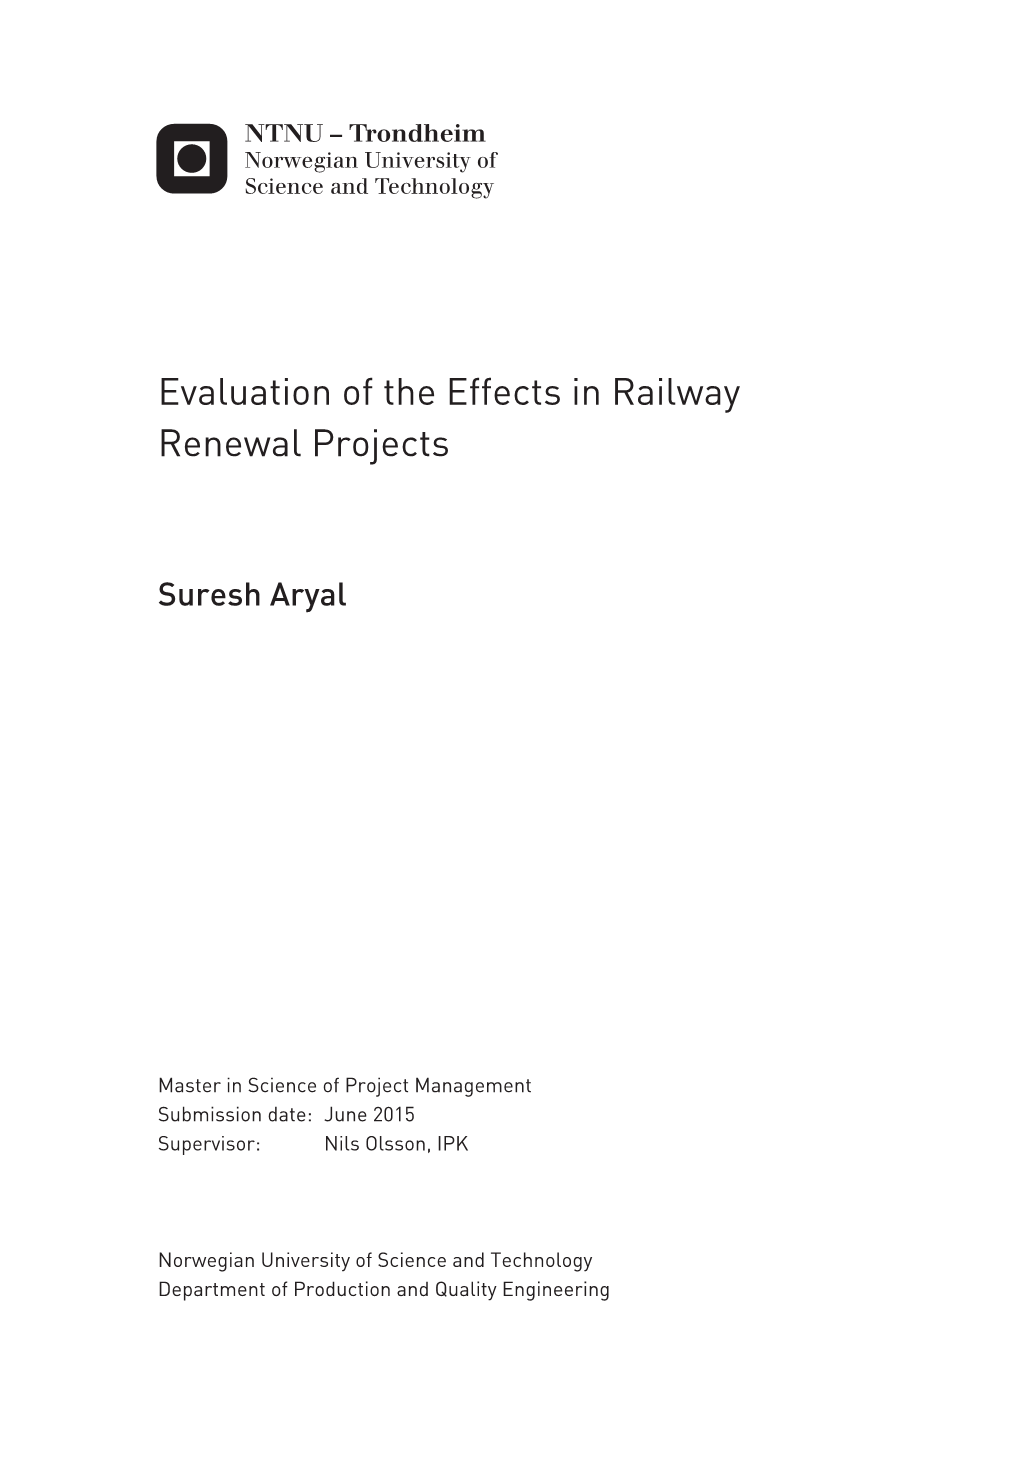 Evaluation of the Effects in Railway Renewal Projects